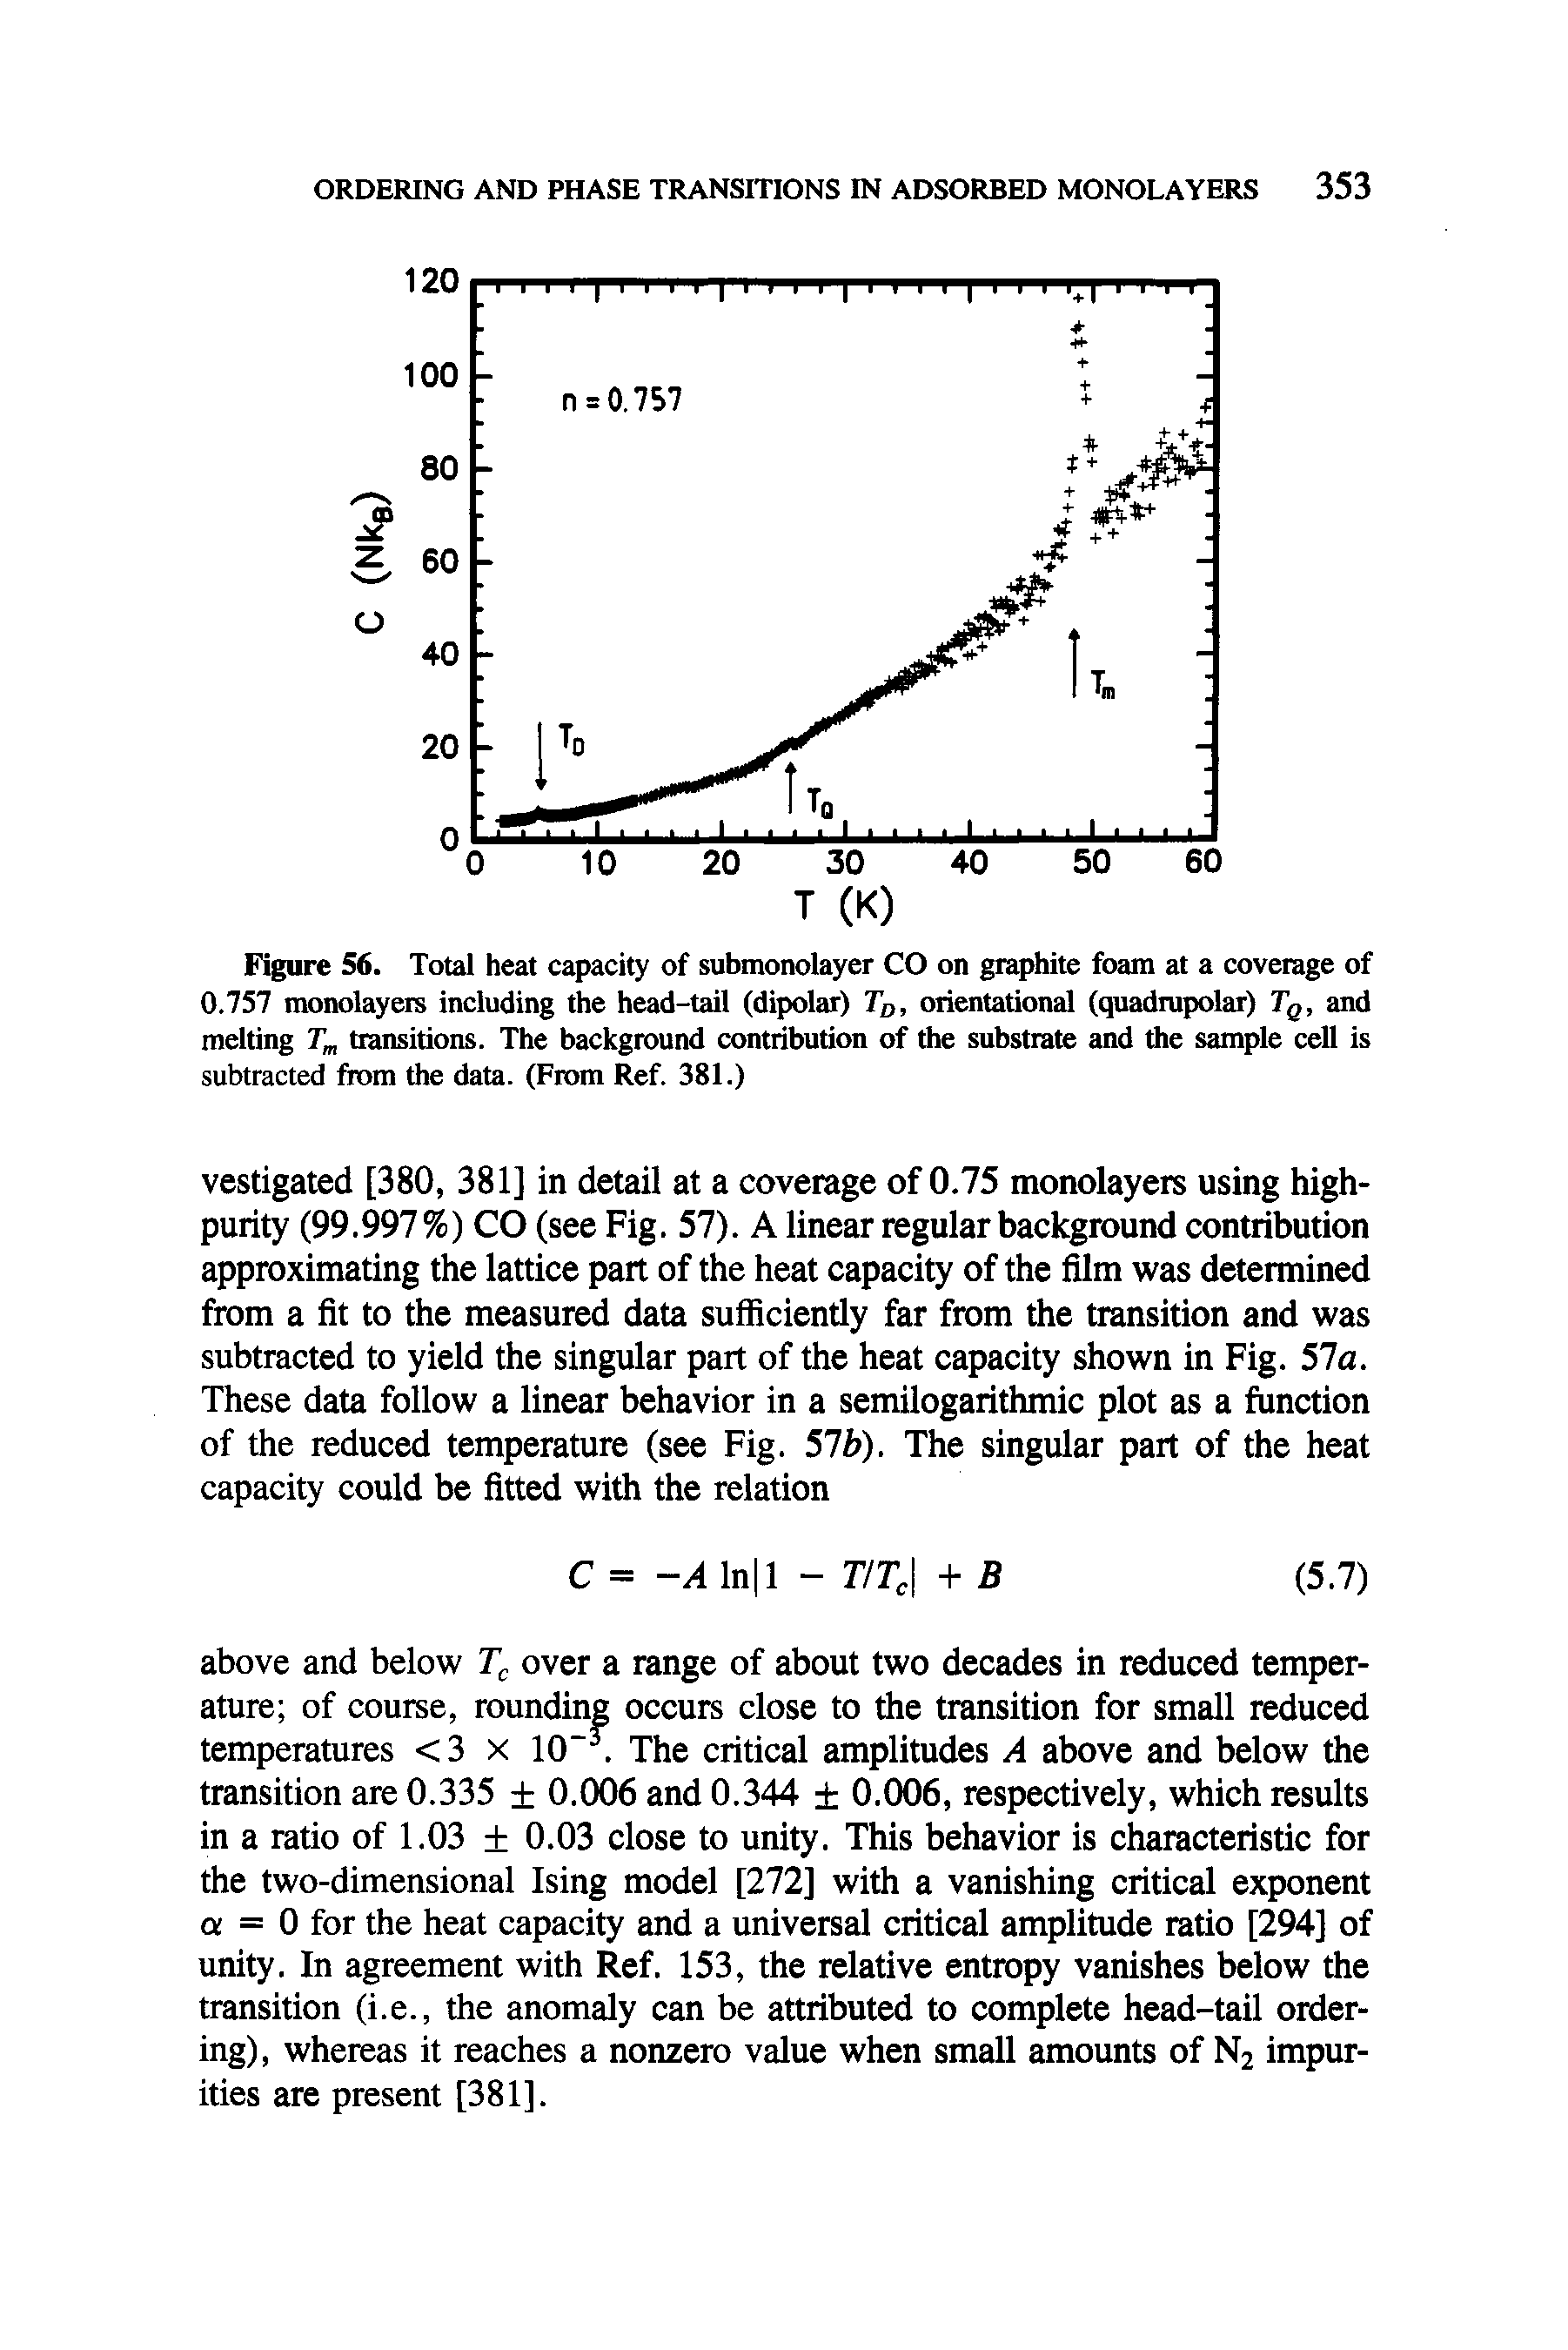 Figure 56. Total heat capacity of subtnonolayer CO on graphite foam at a coverage of 0.757 monolayers including the head-tail (dipolar) To, orientational (quadmpolar) Tq, and melting T transitions. The background contribution of the substrate and the sample cell is subtracted from the data. (From Ref. 381.)...